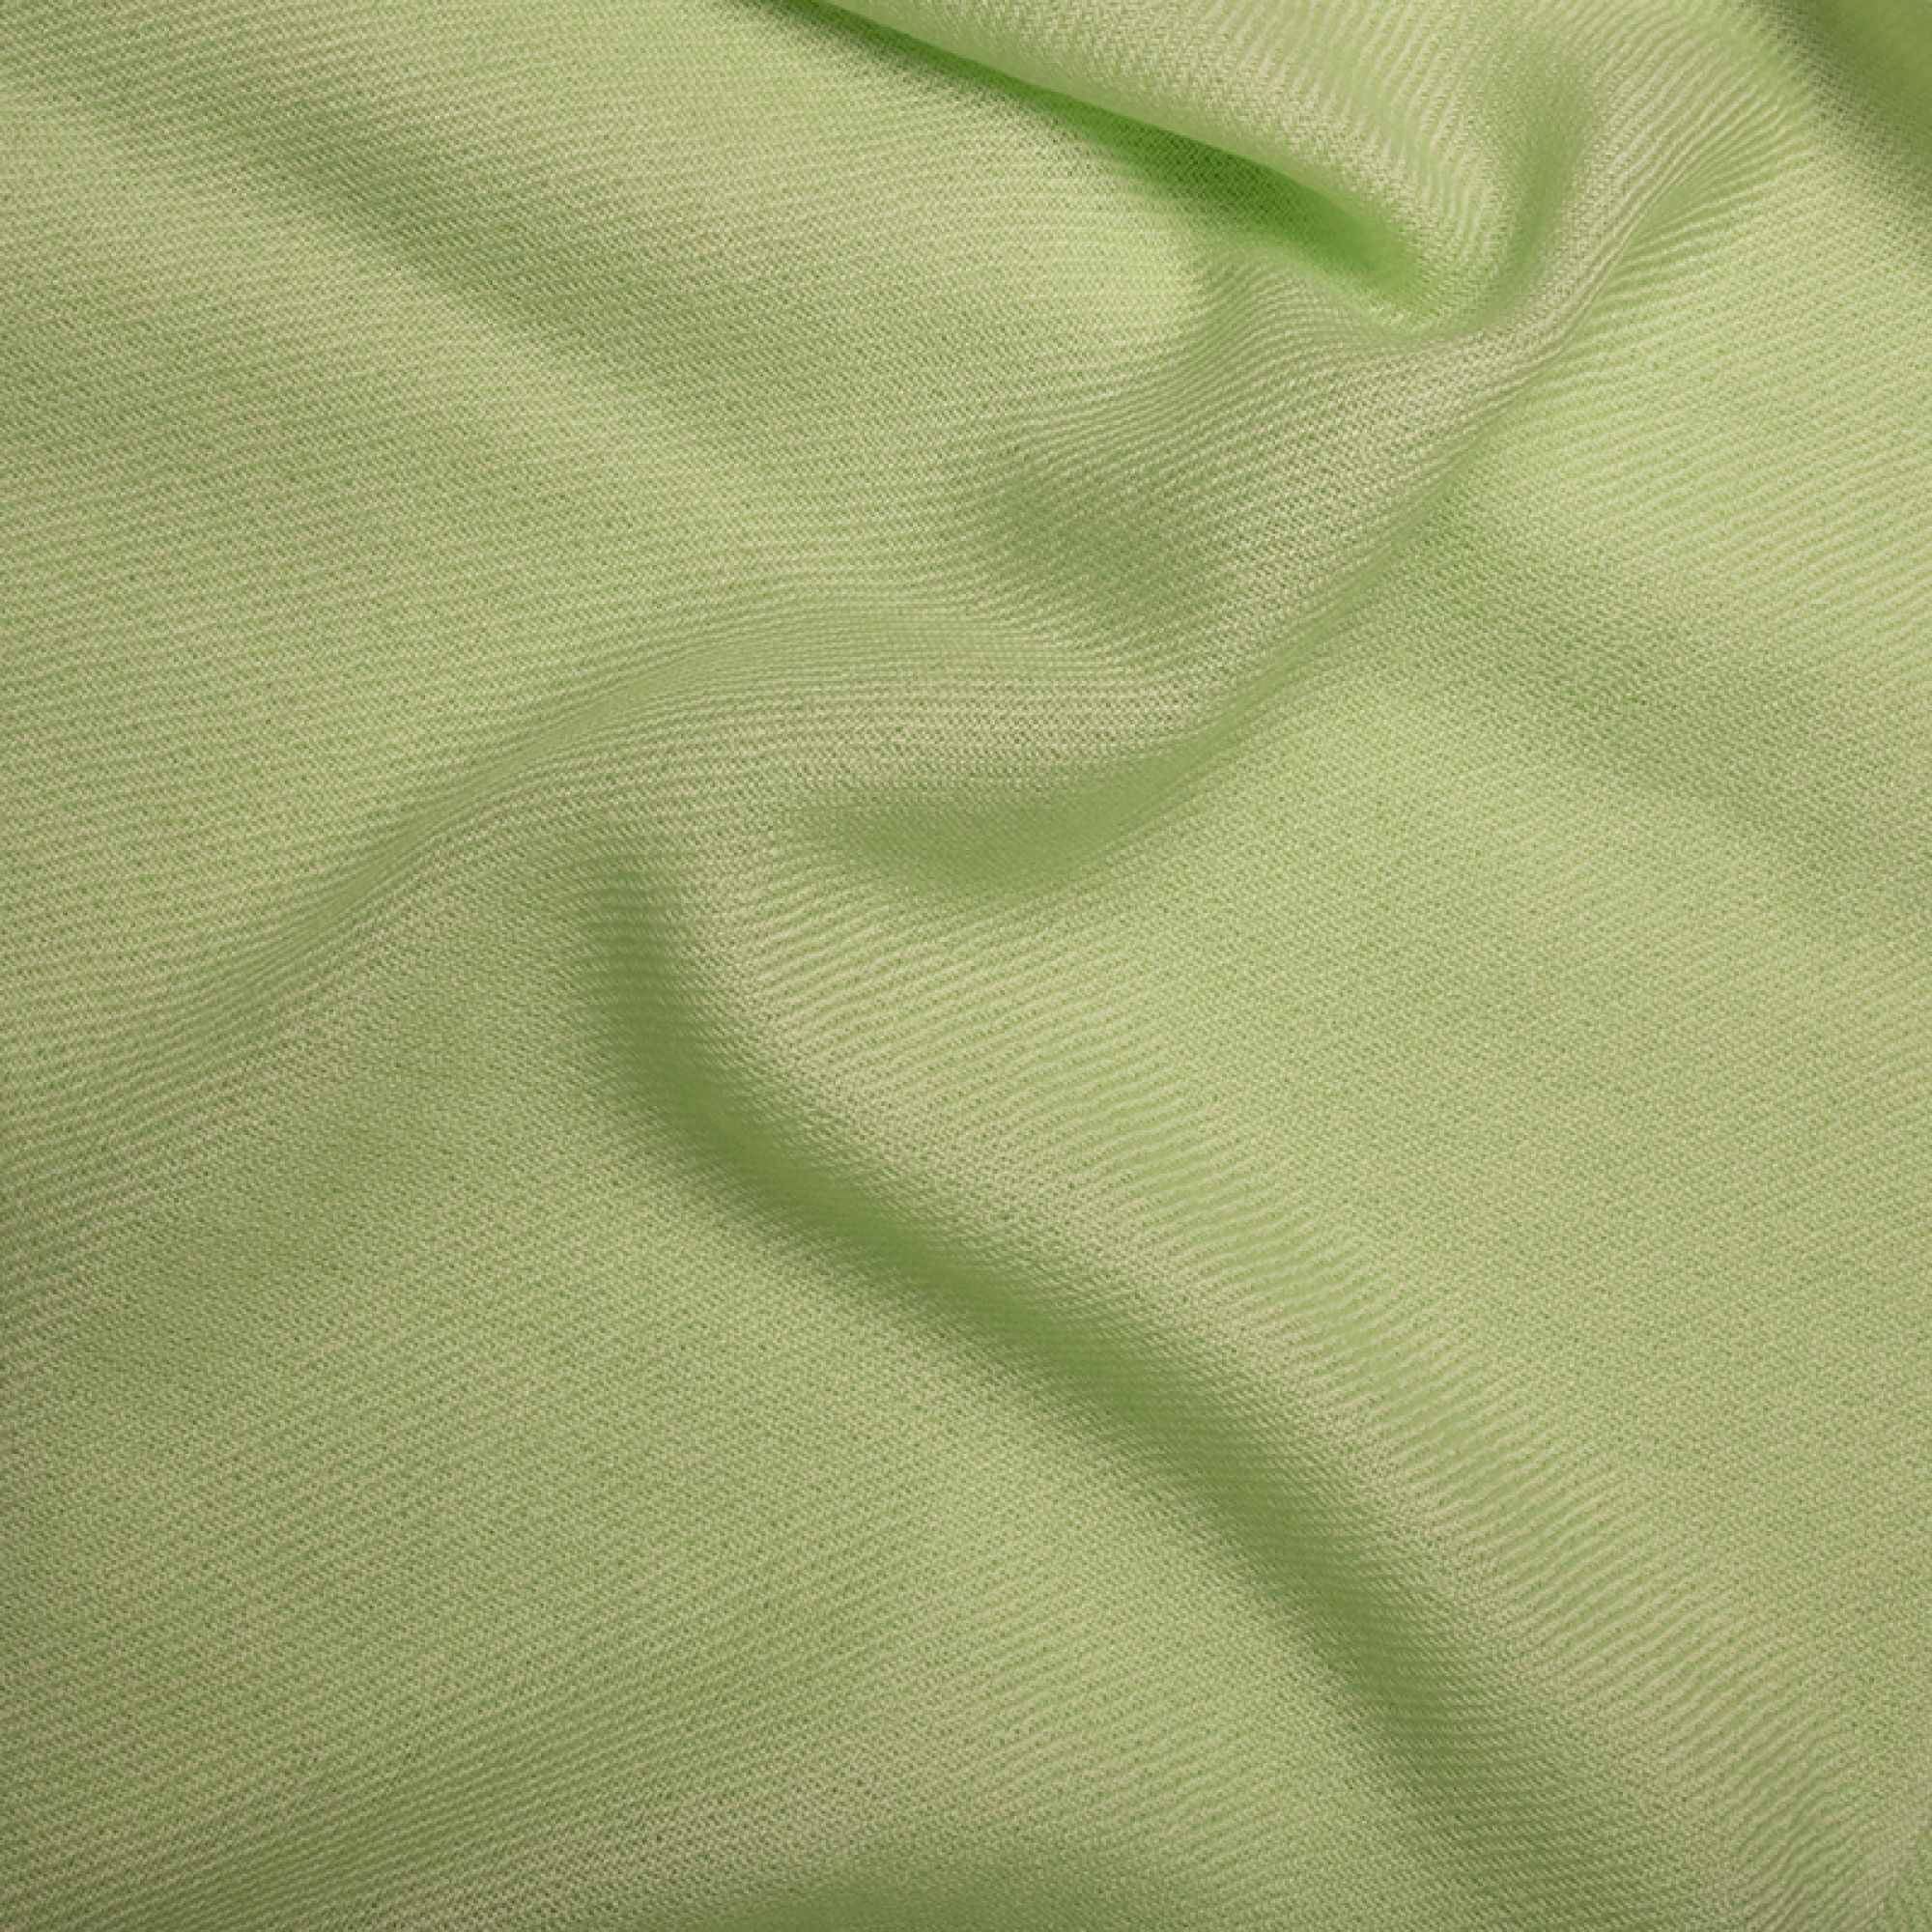 Cashmere accessories toodoo plain m 180 x 220 lime green 180 x 220 cm